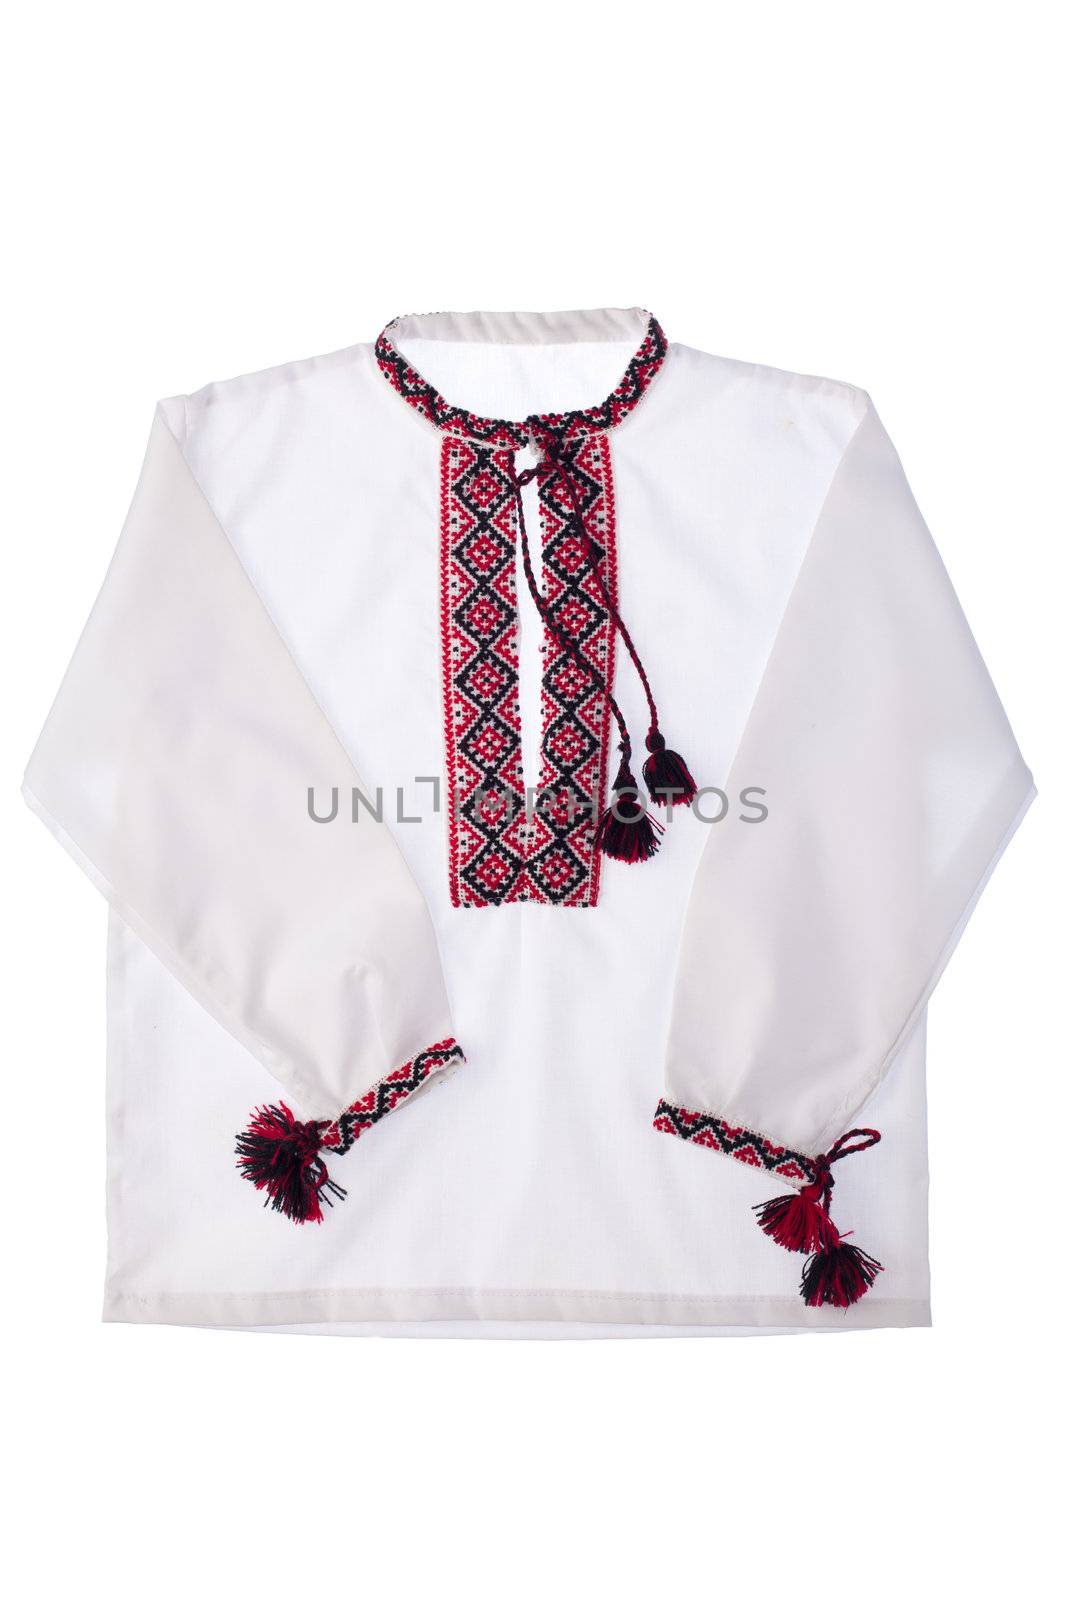 National Ukrainian traditional ornate handicraft symbol embroidery in red cross-stitch handmade white cotton men’s shirt vyshyvanka with ornamental pattern isolated